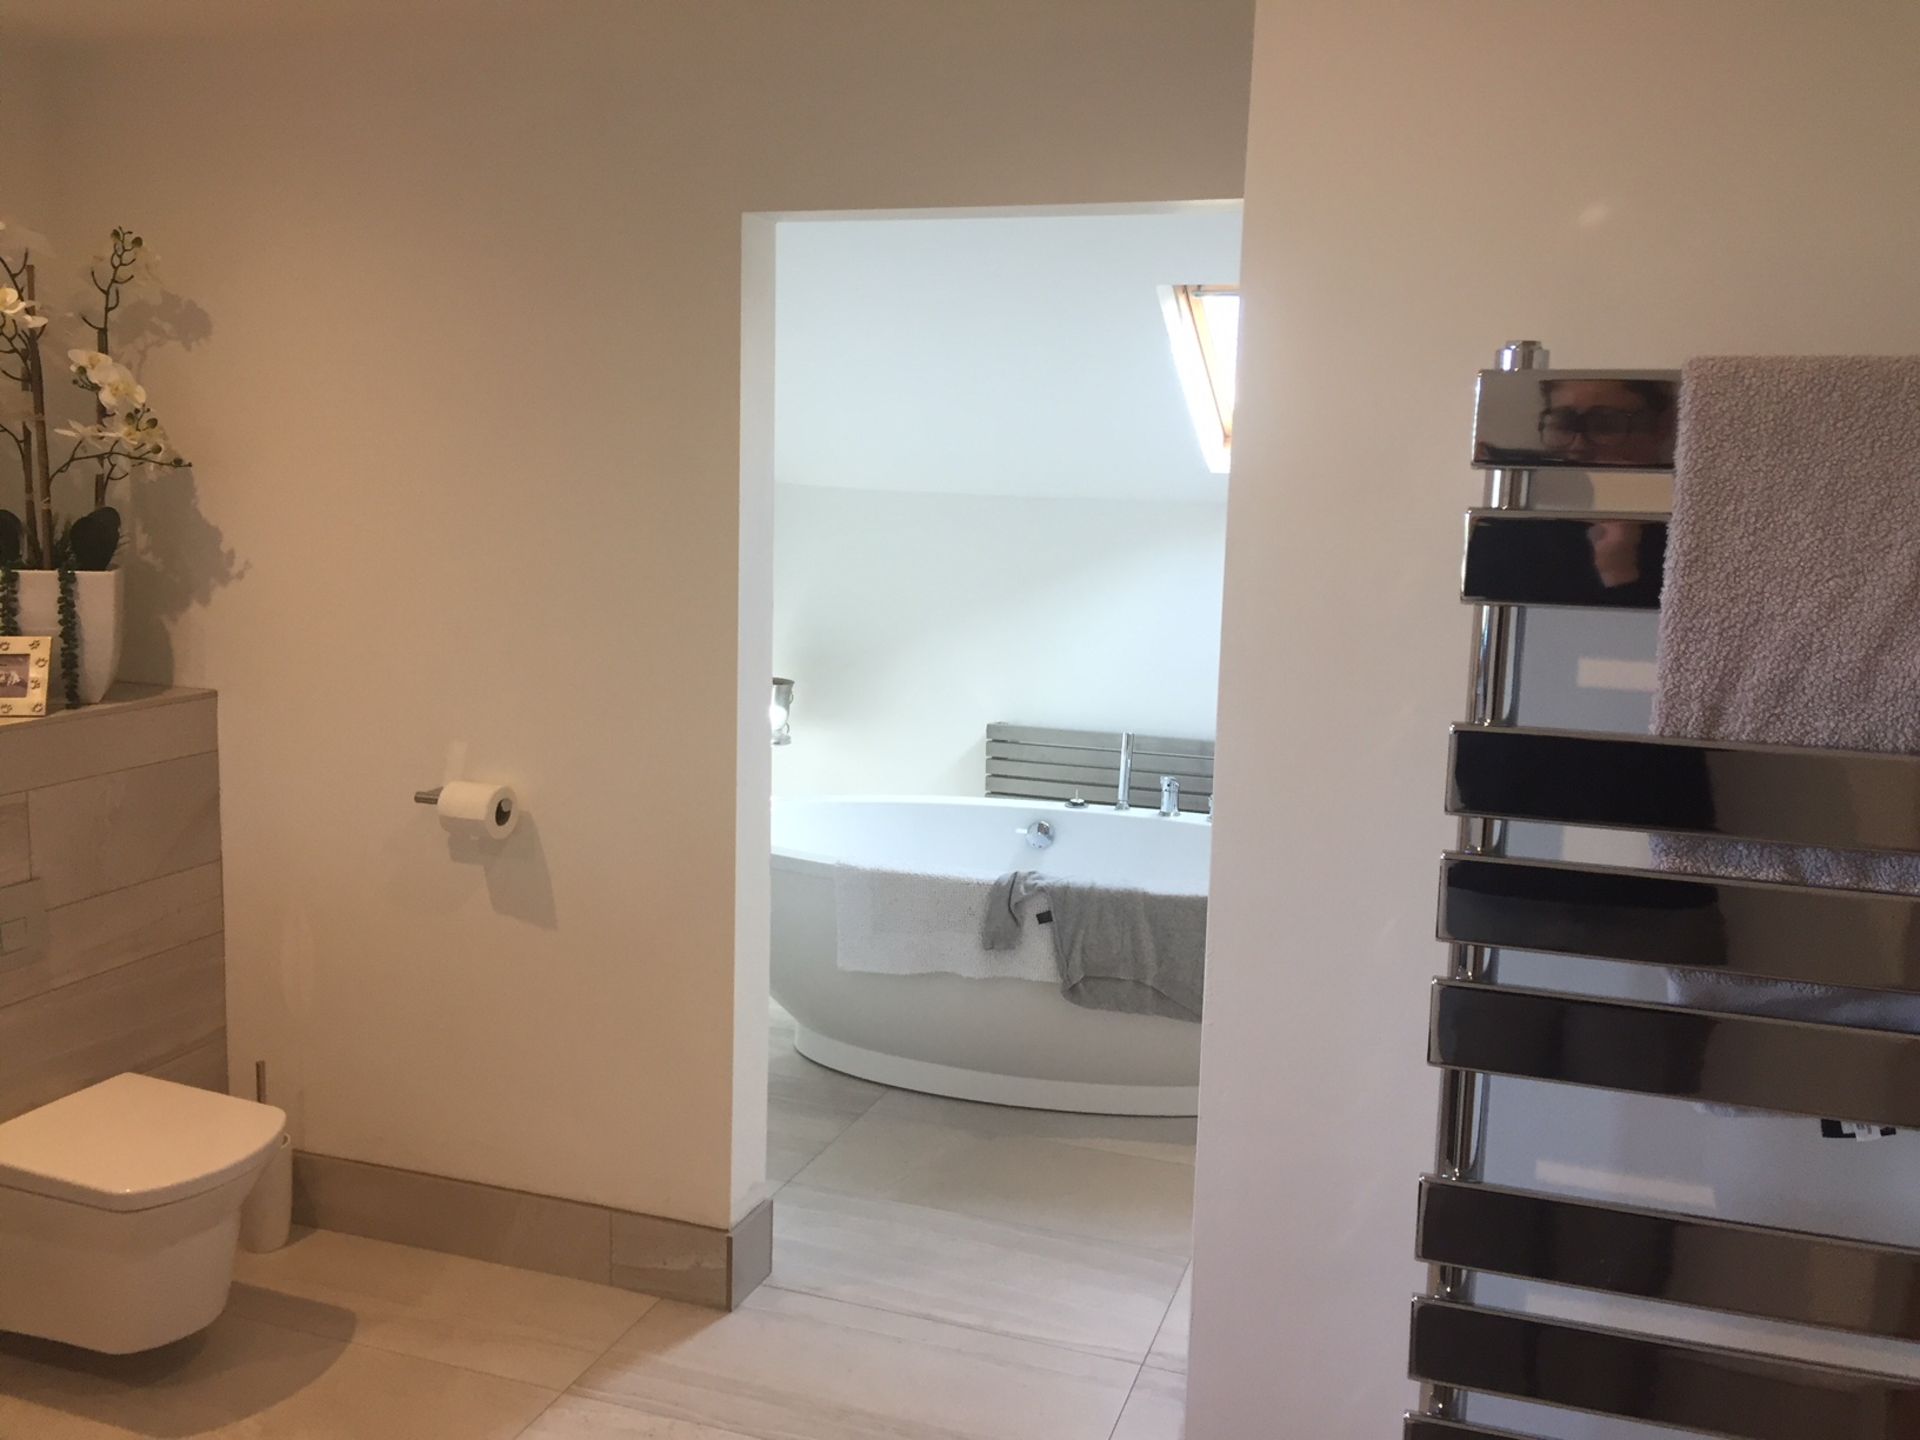 Luxurious Bathroom Suite including Jetted Bath, Shower Unit, Sink Unit with Mirror, Toilet and - Image 8 of 10